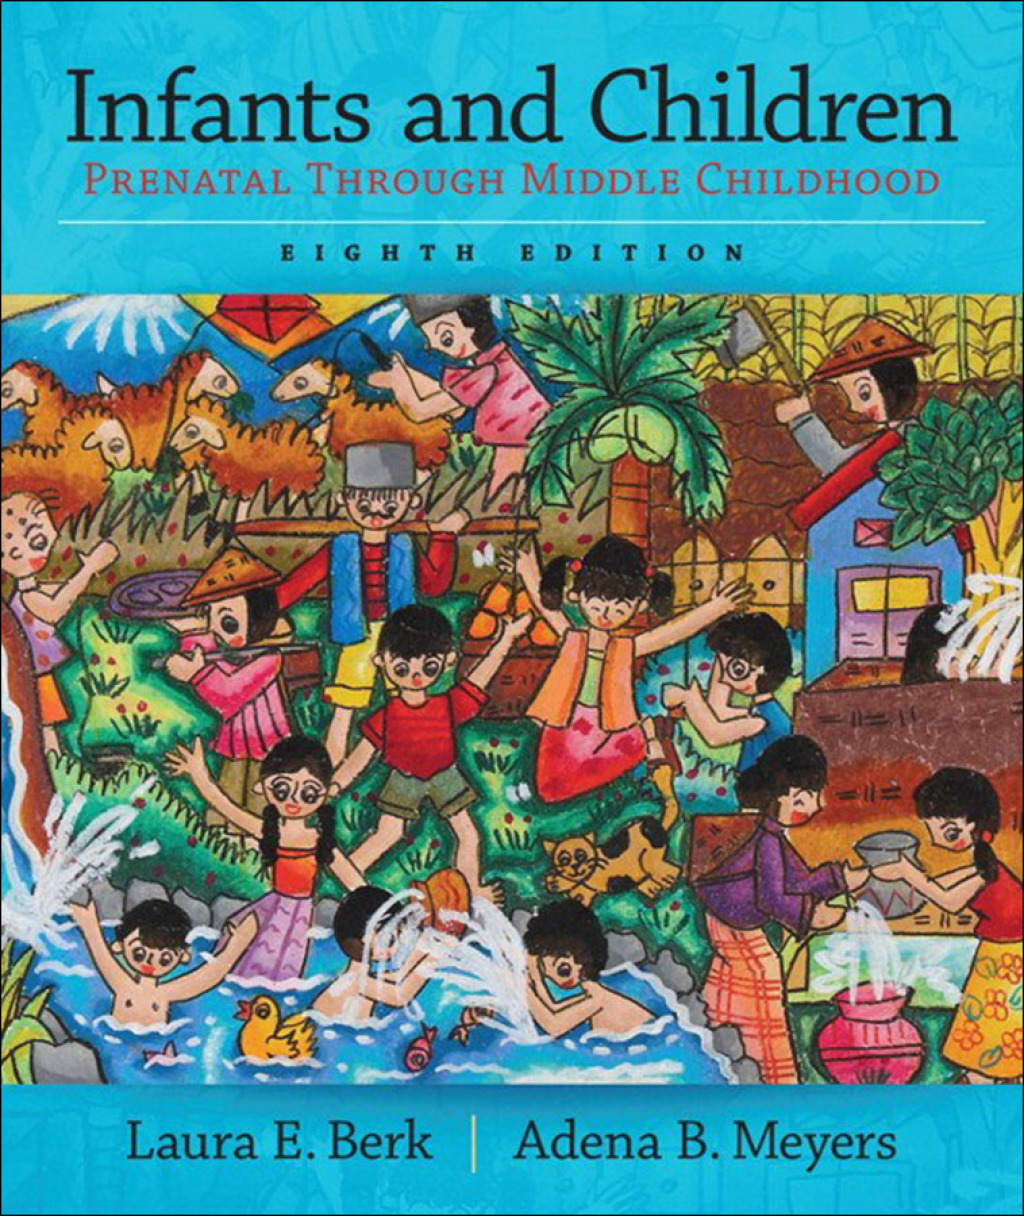 Infants and Children - 8th Edition (eBook Rental)